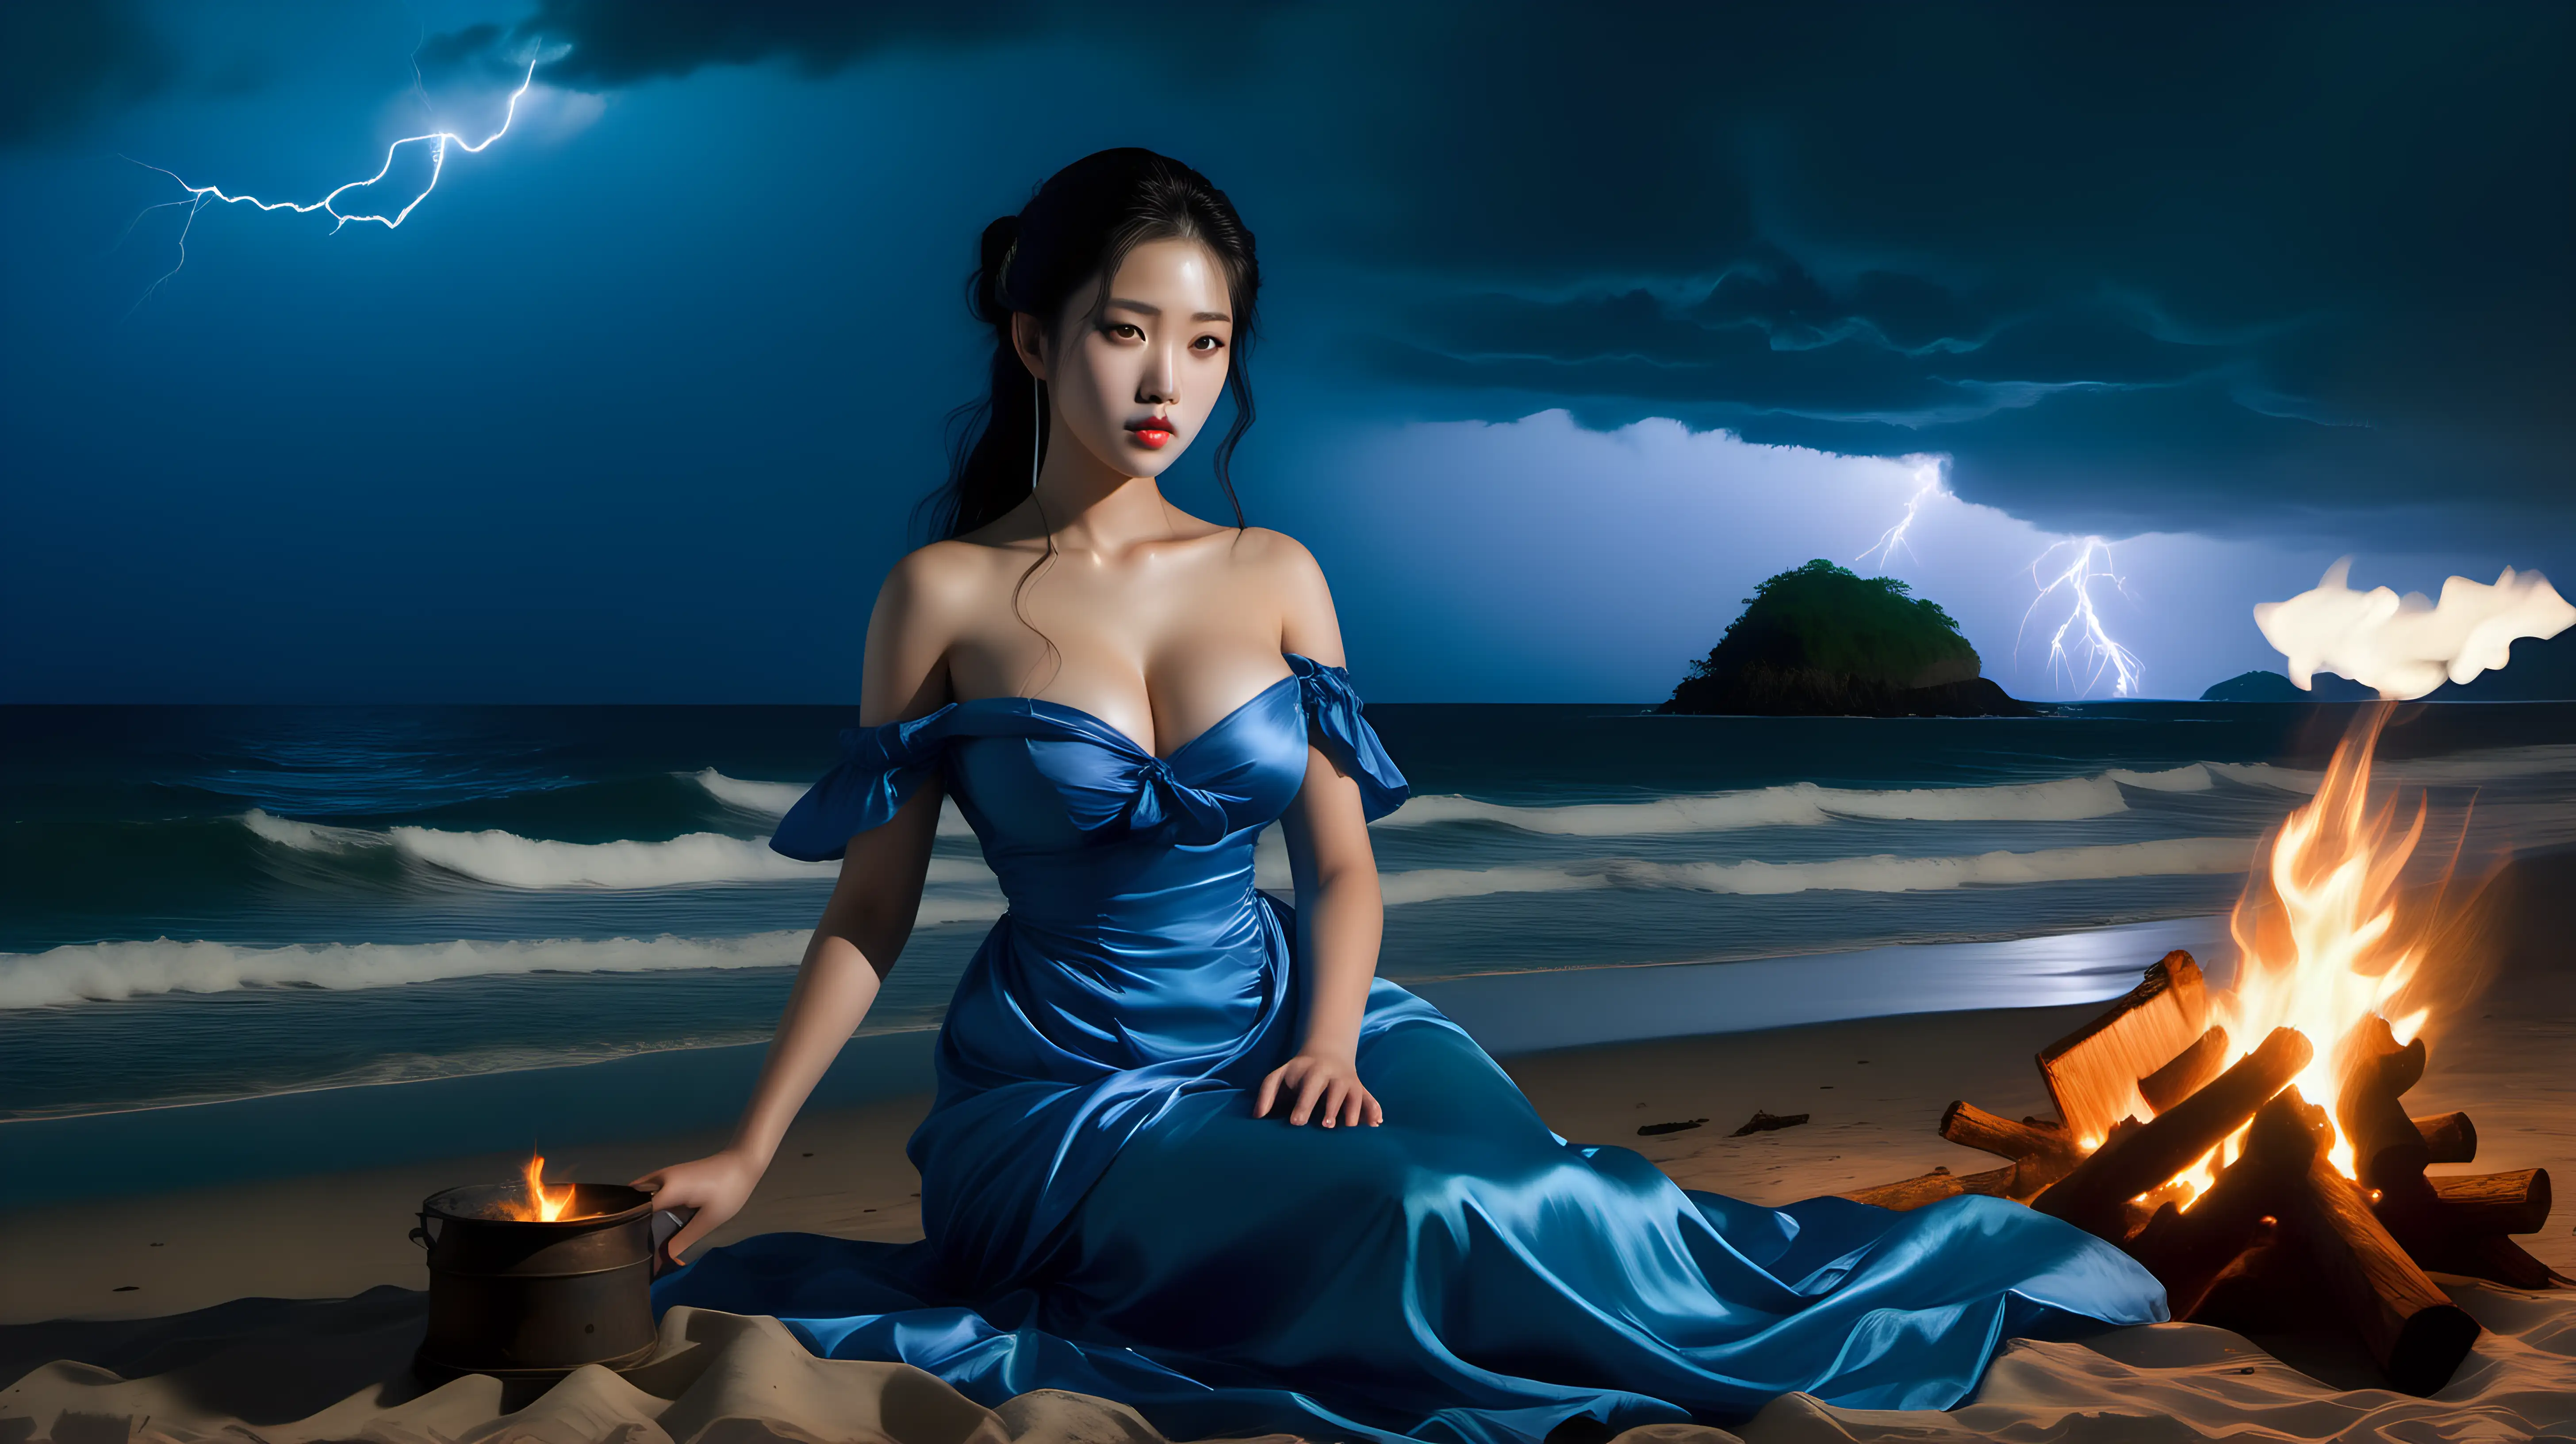 A tropical island beach. The water is blue. There are big waves. There is a small camp fire in the distance. A young korean beauty sitting alone beside the camp fire. She has full breasts. She is wearing a blue silk dress. The time is at dusk. There is a 18th century shipwreck in the distance. It is raining. Lightning in the cloud.